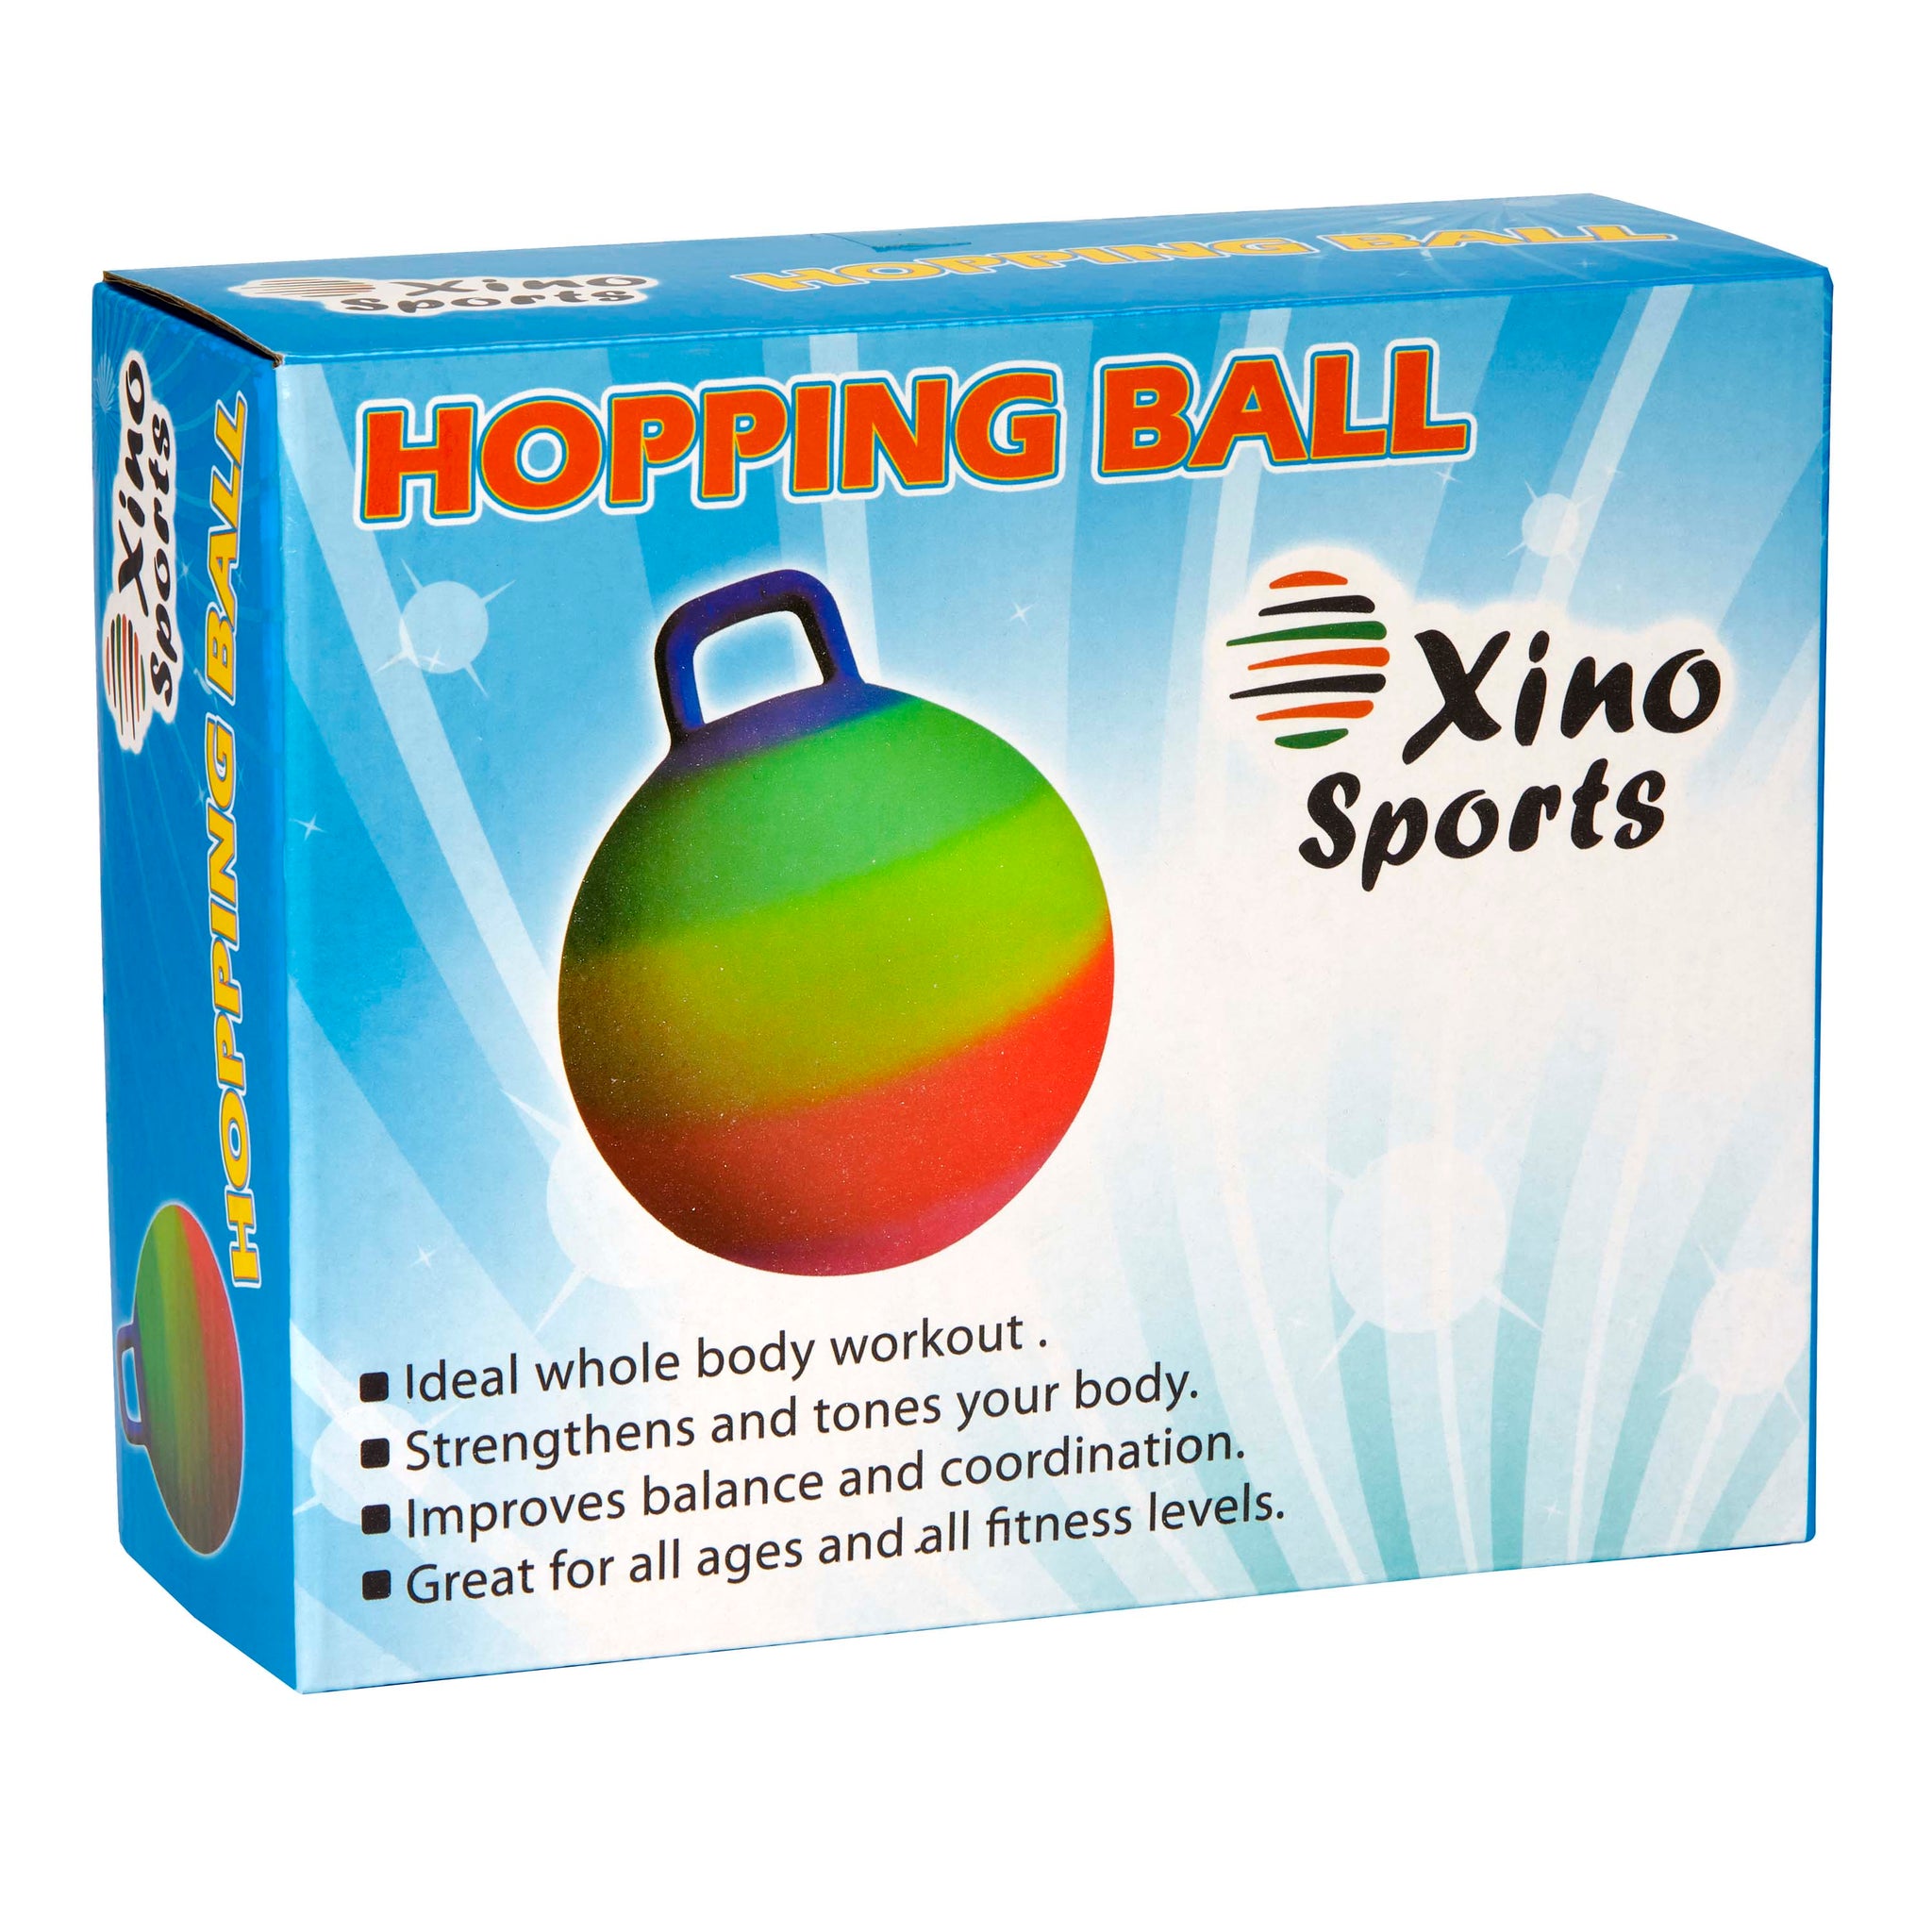 Xino Sports Deluxe Hopping Ball for Kids, Offers Hours of Incredible Fun for Boys and Girls, Amazing Space Hopper Ball, Safe and Durable Jumping Ball with Handle, 18 Inch Diameter - Xino Sports